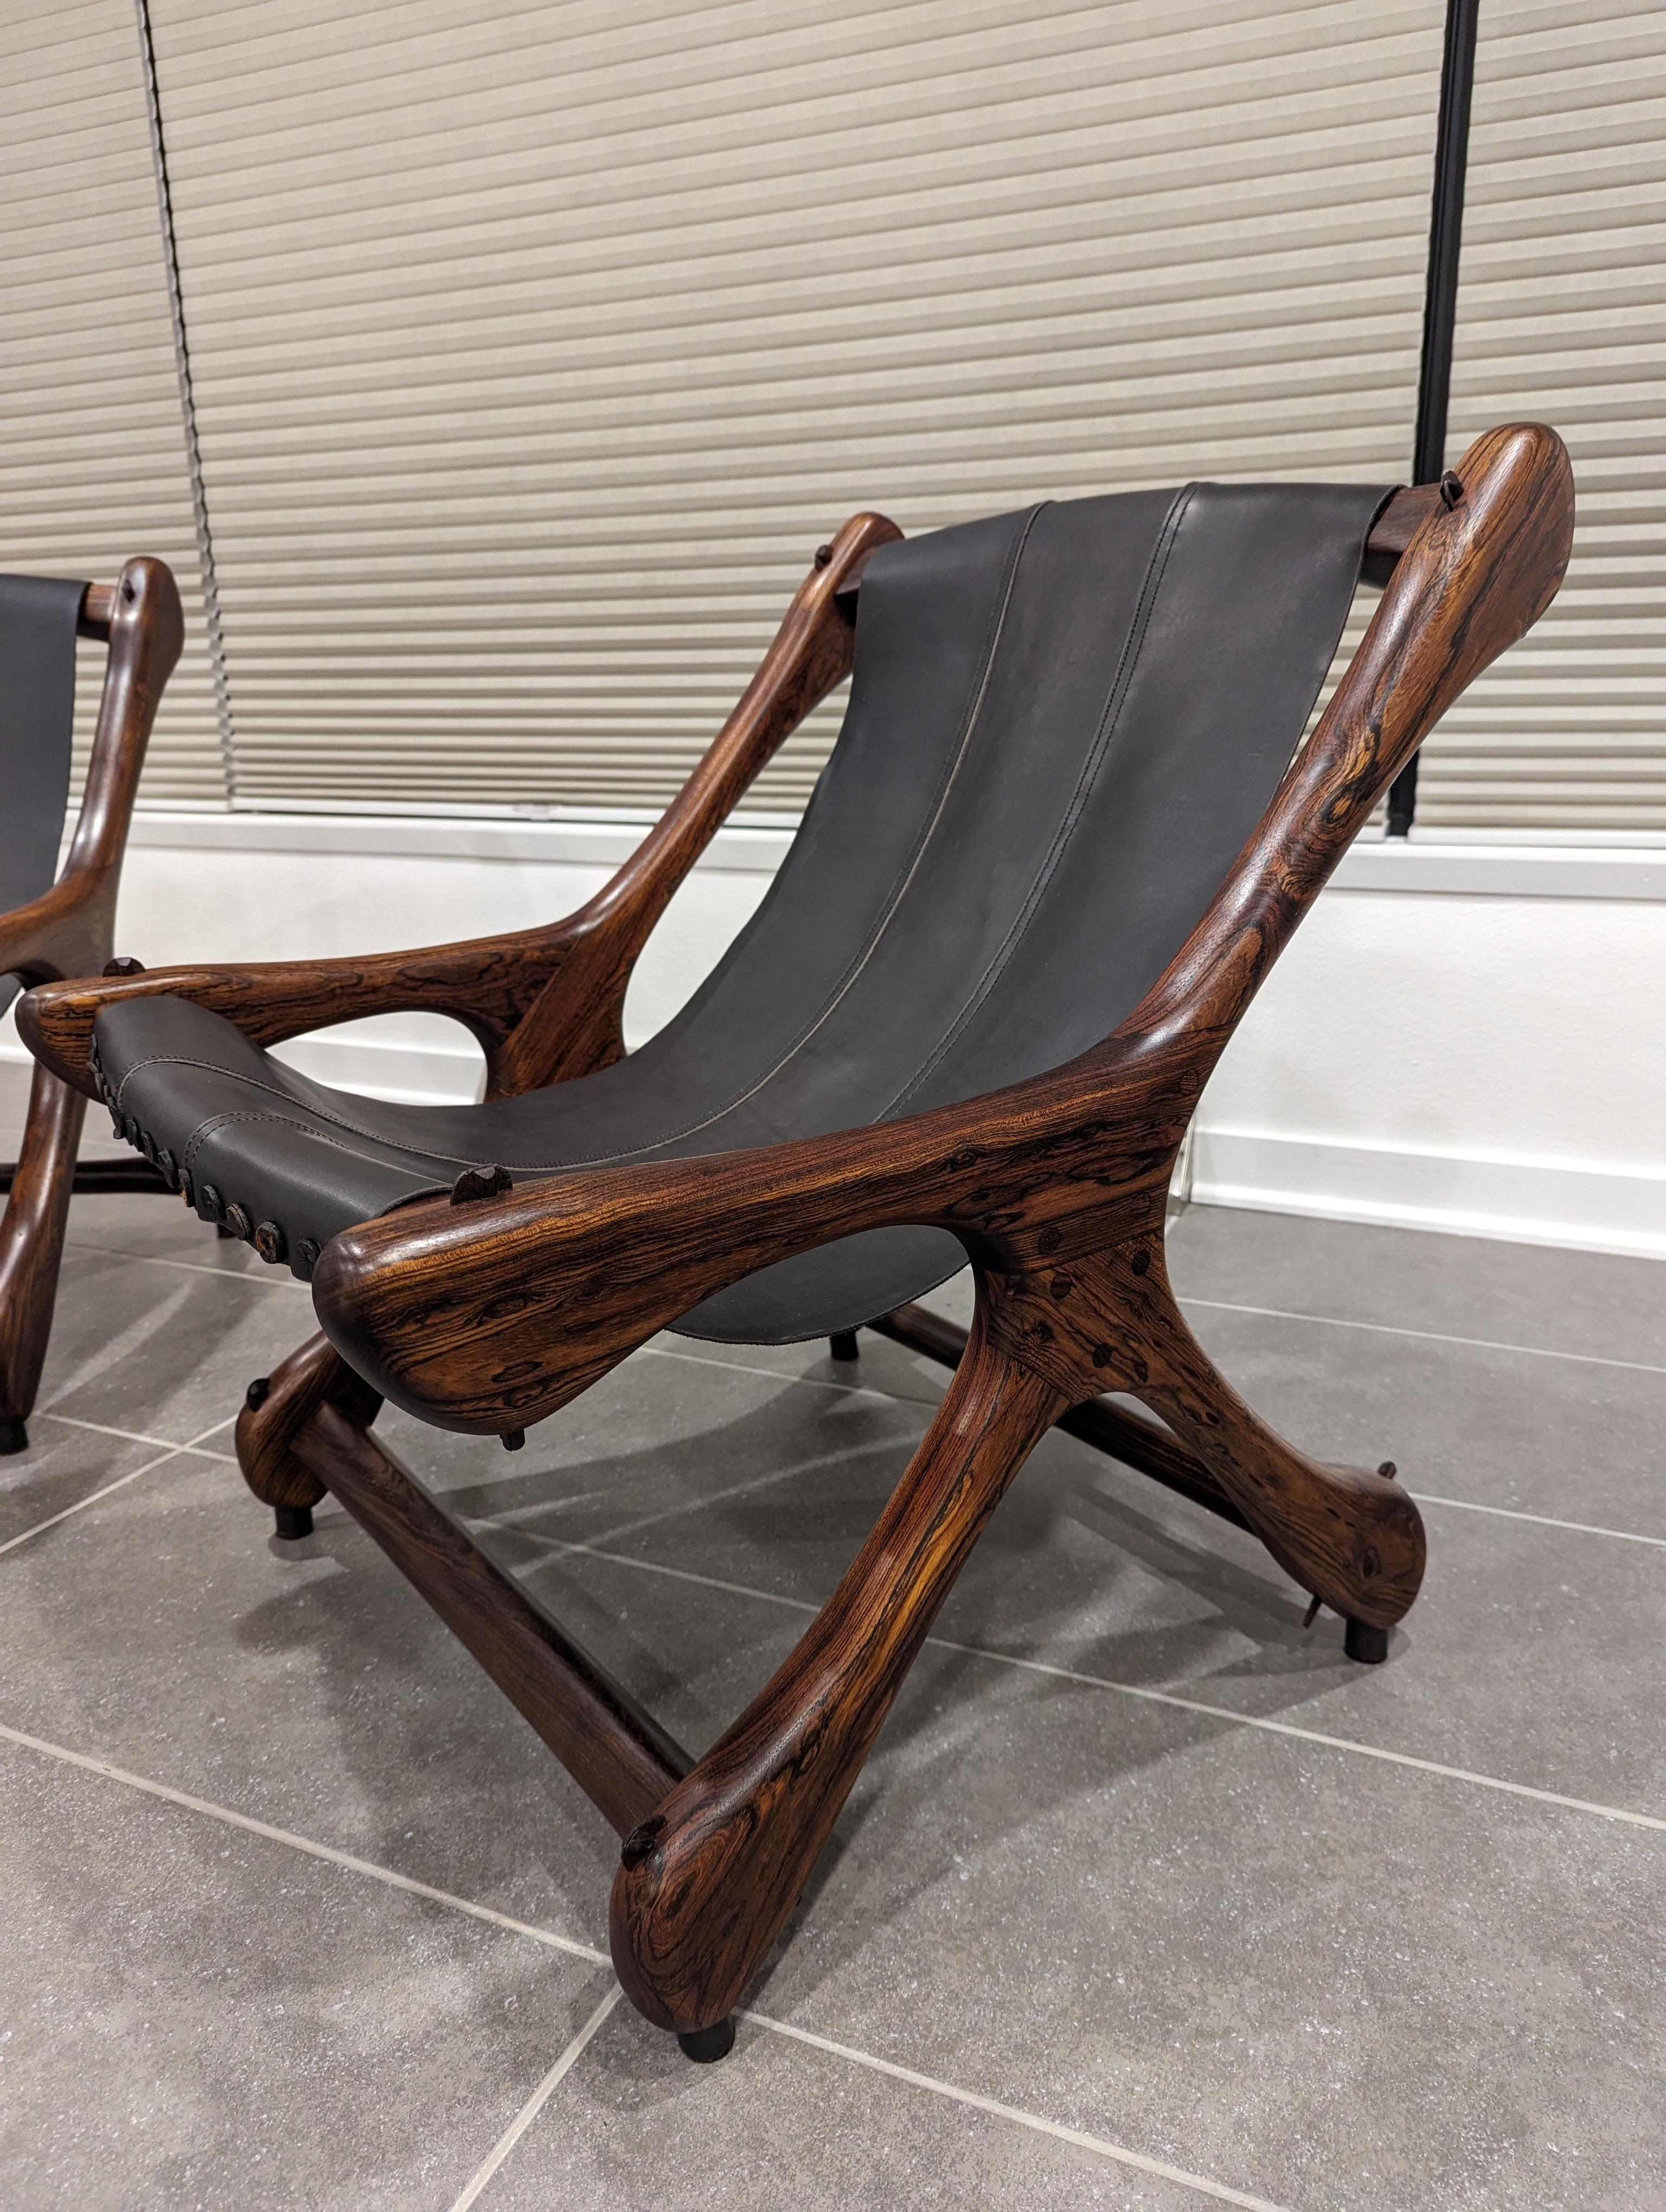 Don Shoemaker Sloucher Rosewood & Leather Sling Chairs for Señal, S.A., 1960s For Sale 4